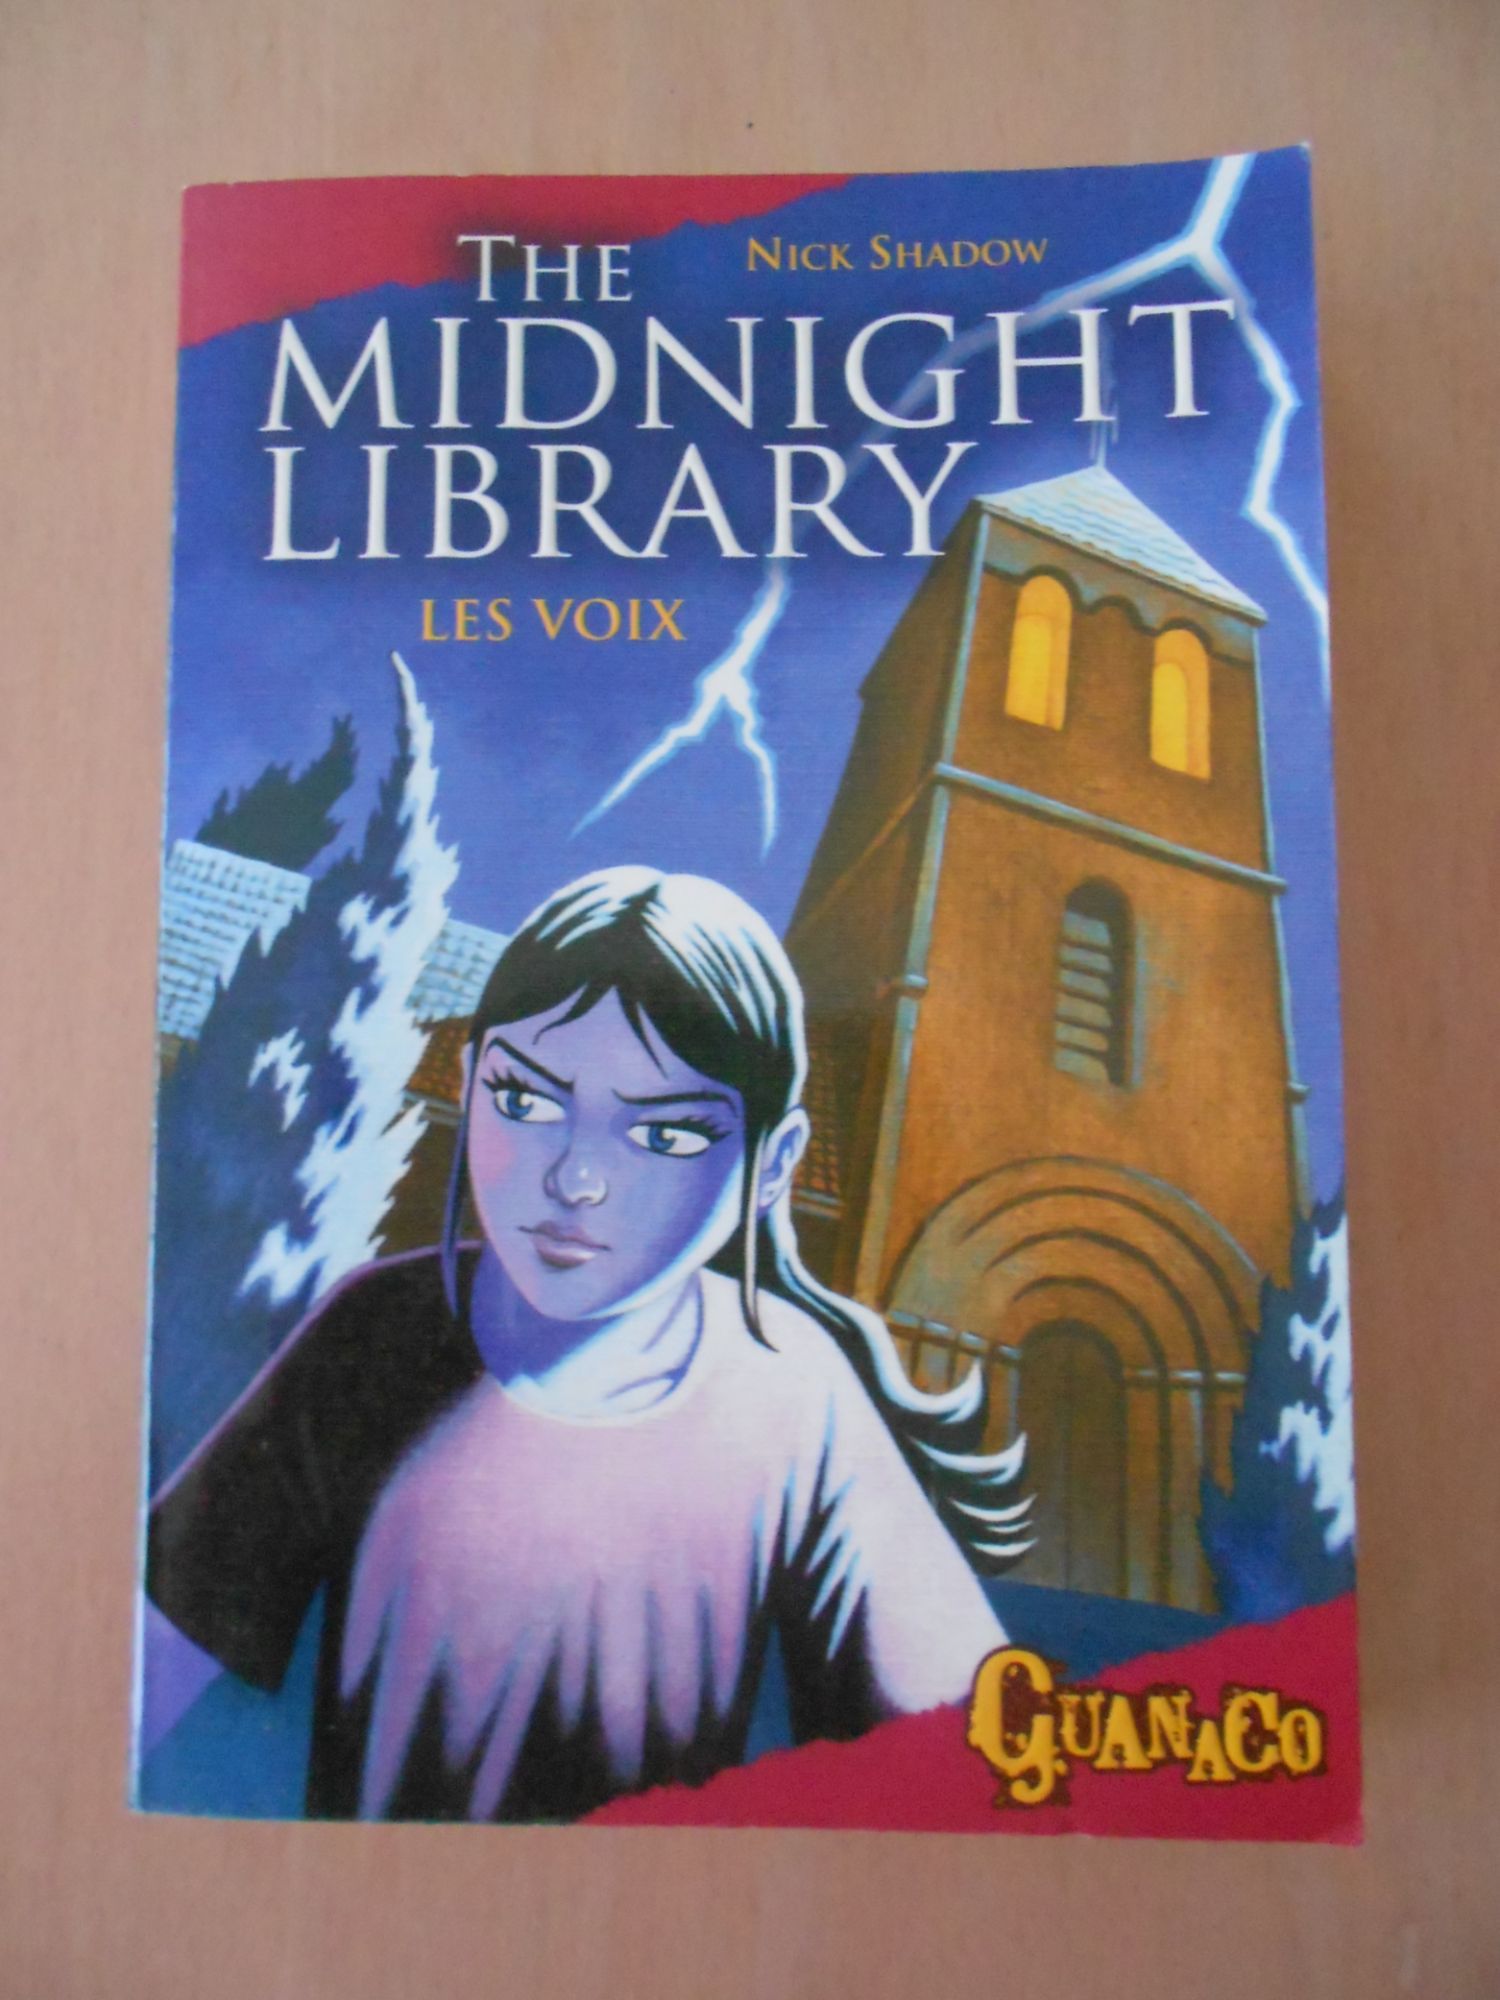 THE MIDHNIGHT LIBRARY - Tome 1 : LES VOIX